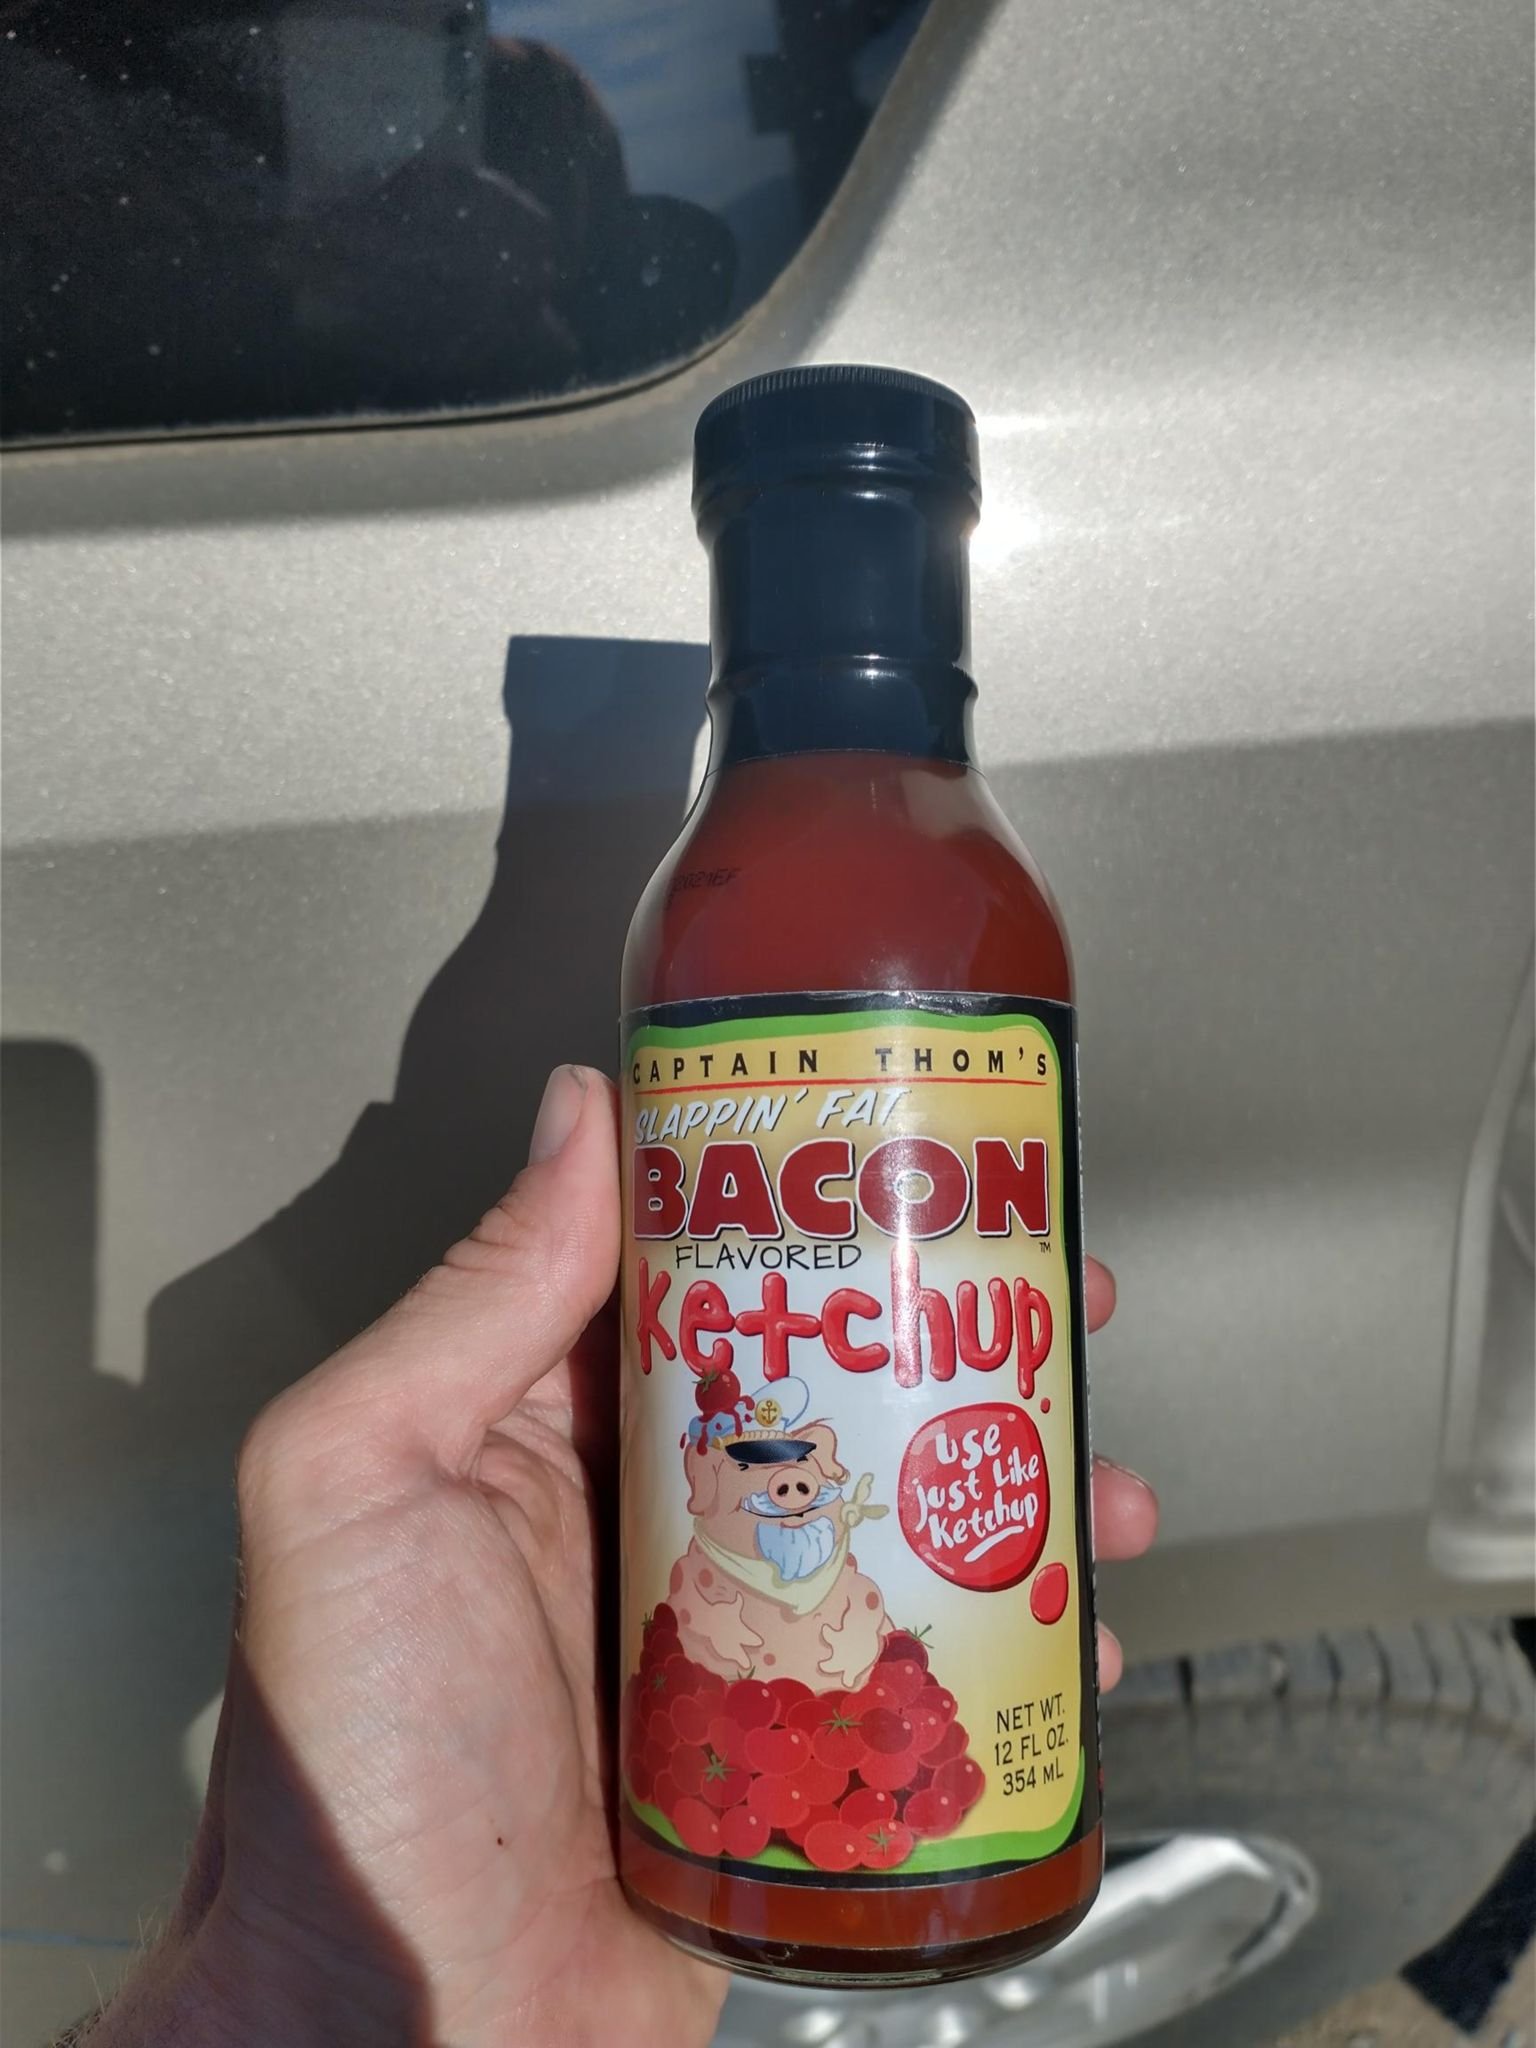 I bought this for 16$ ( lol ) mostly to support the statues. It wasn't good. Tasted like bad BBQ sauce.